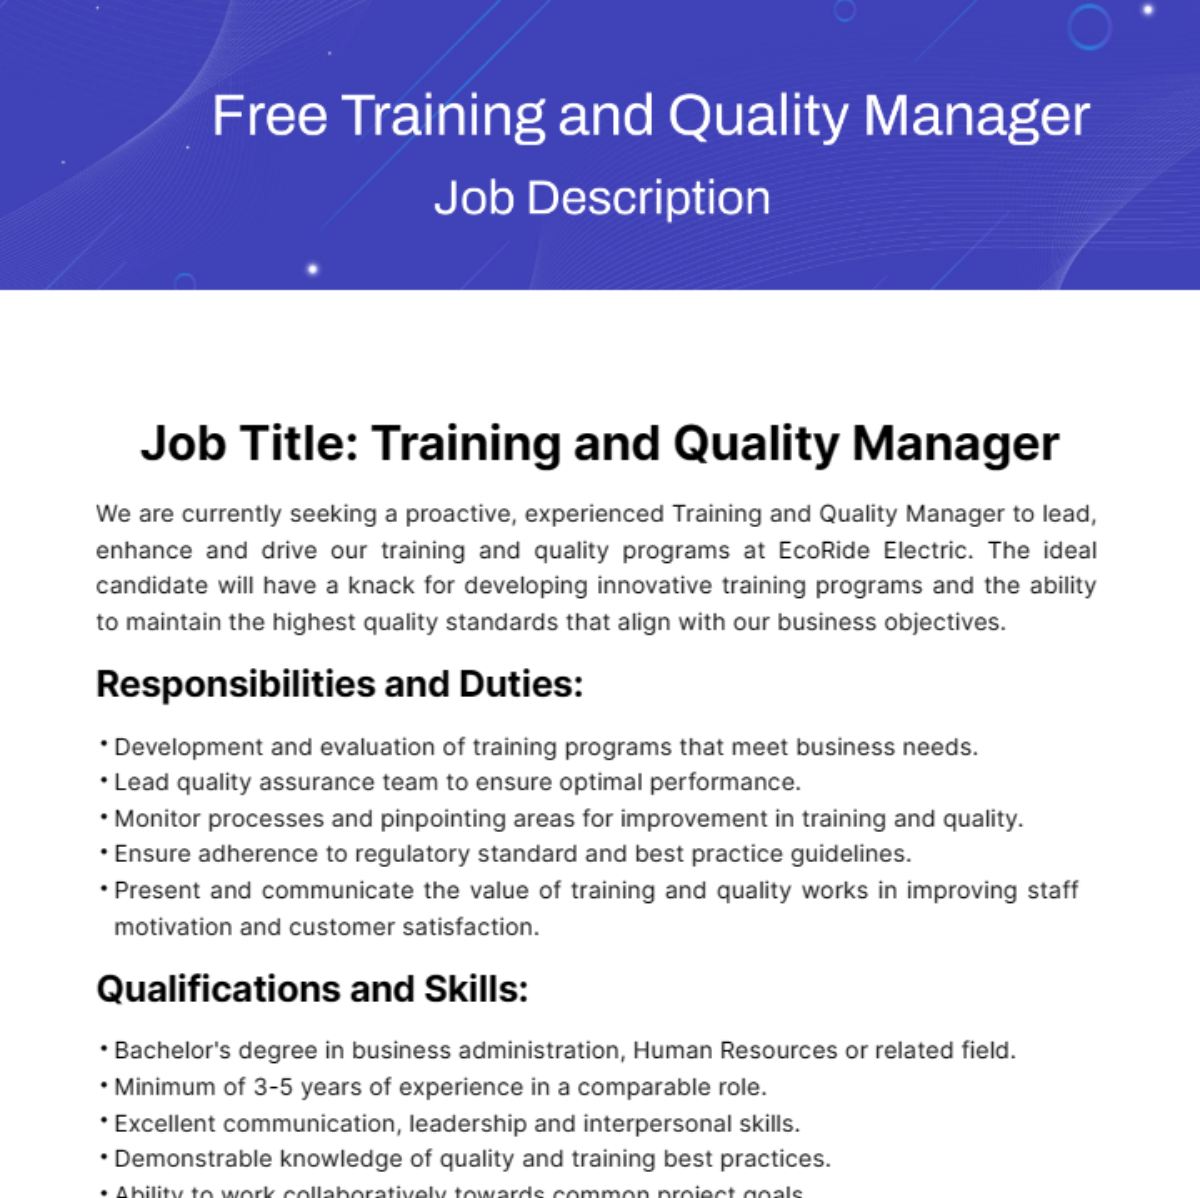 Training and Quality Manager Job Description Template